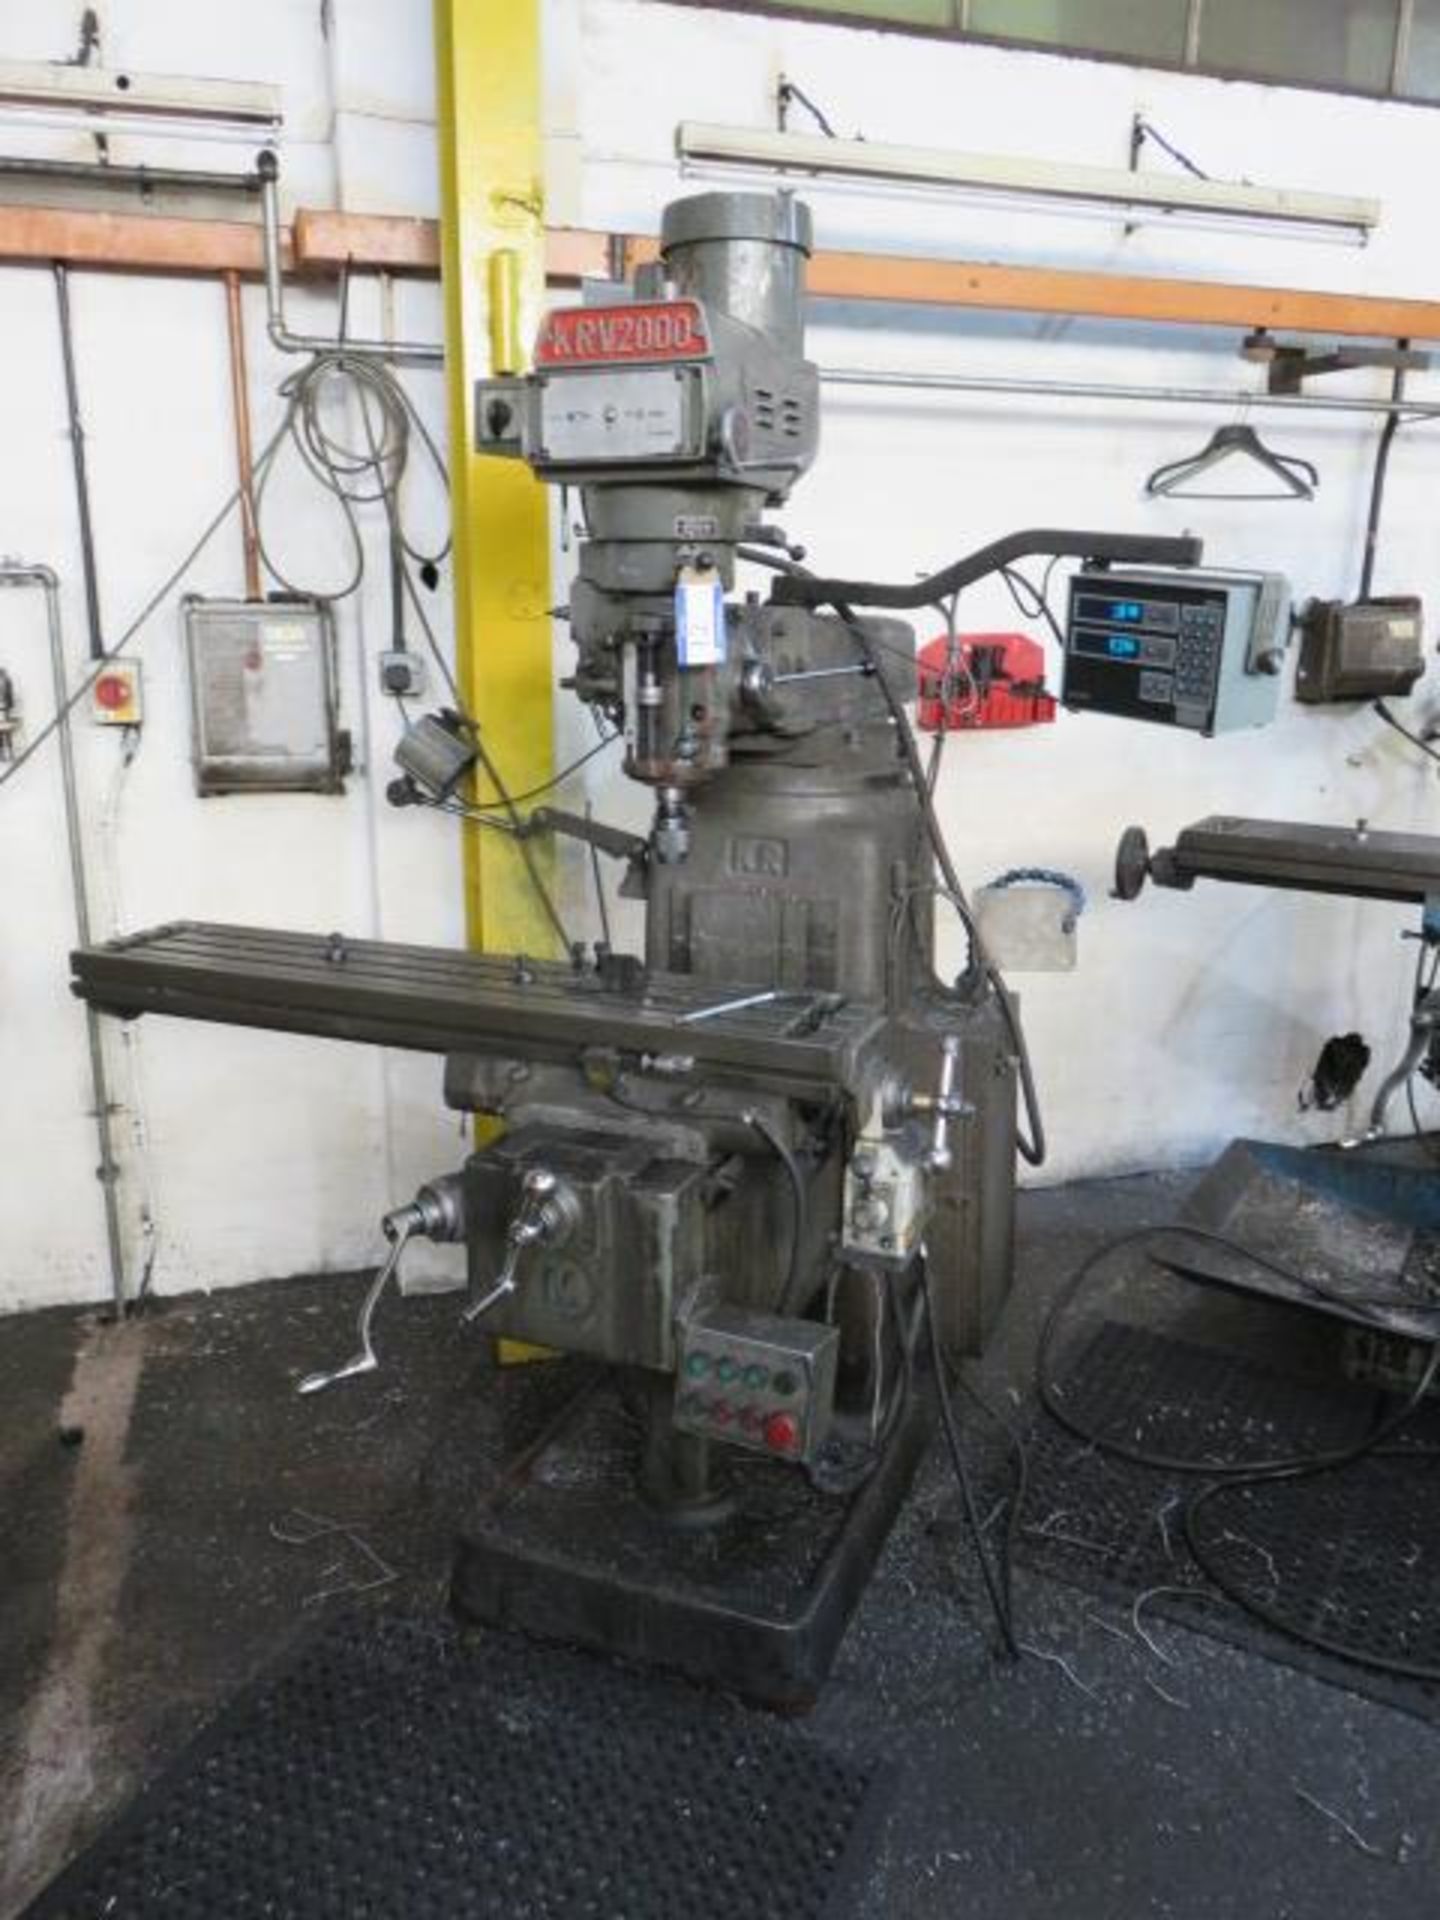 XYZ KRV V2000 Turret Milling Machine Complete With Acurite Controls Serial No. 7074 (Full RAMS Docu